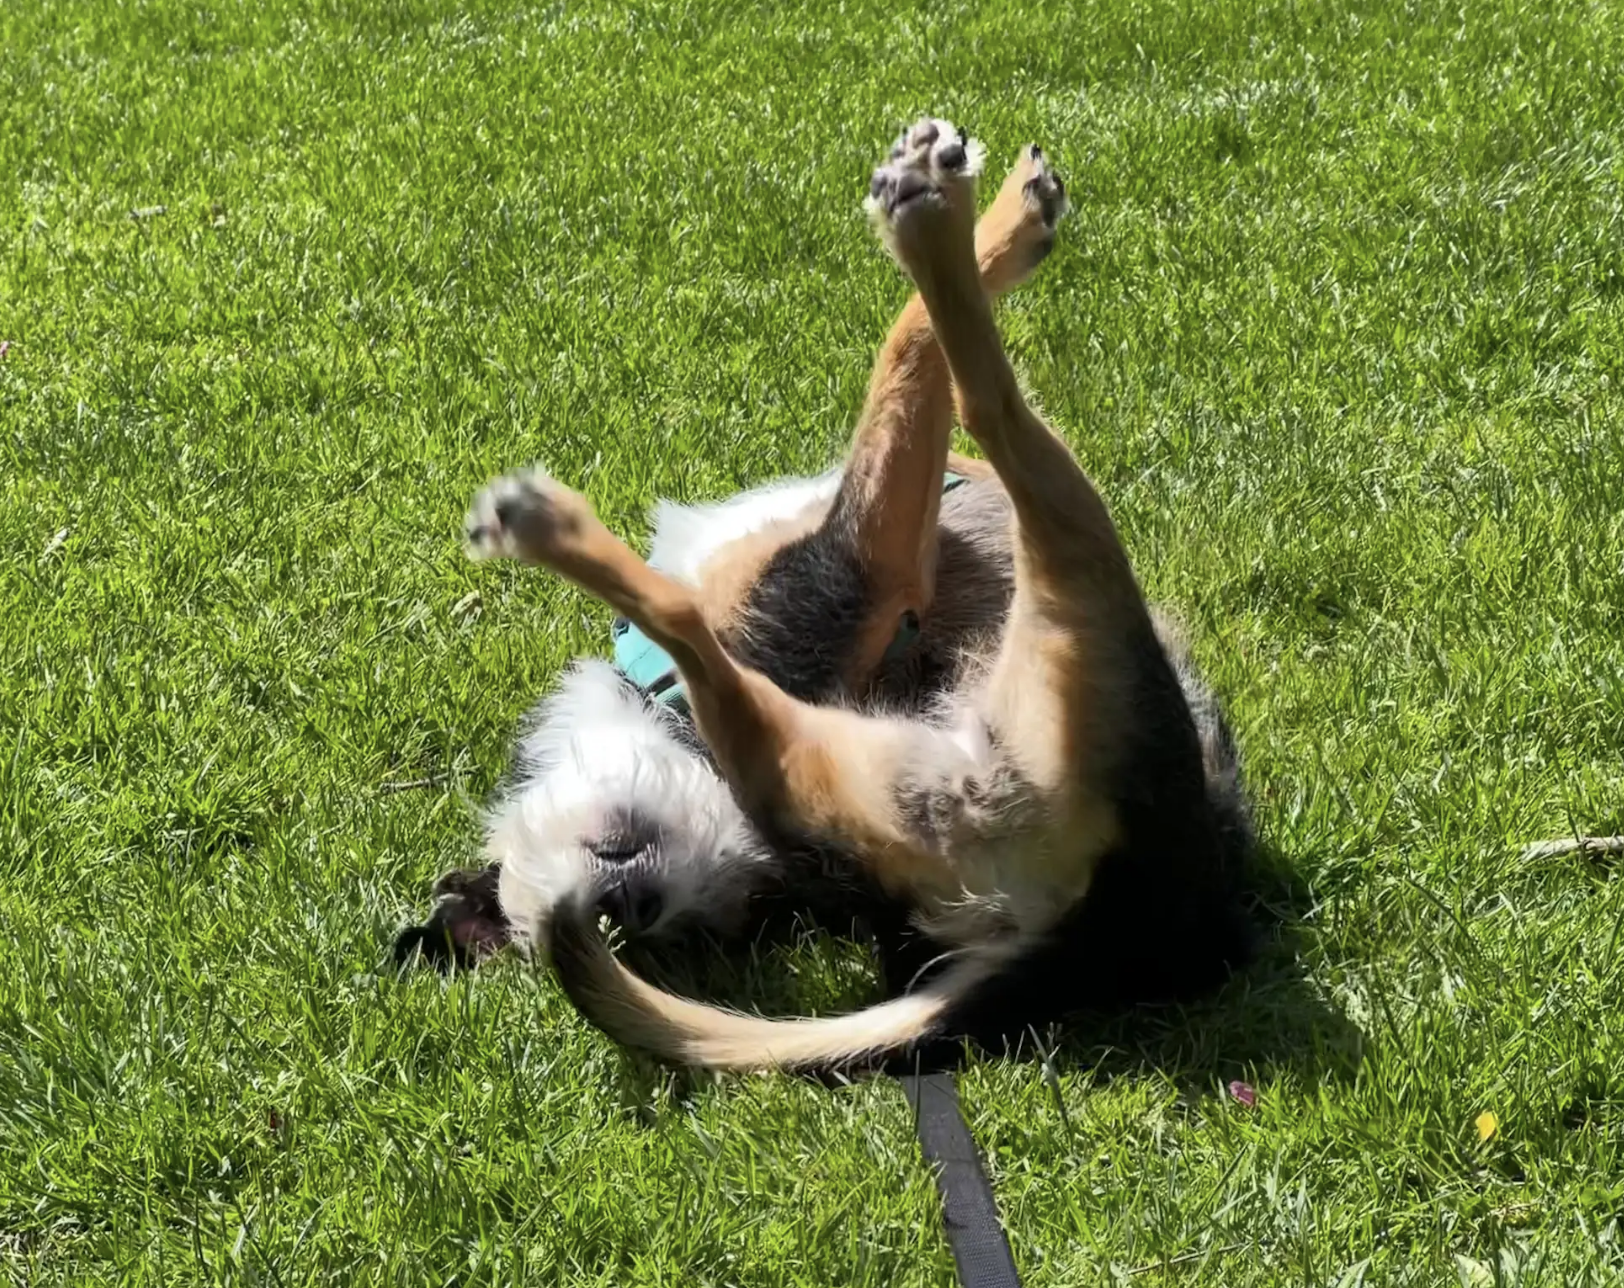 A dog lies on its back on the grass, legs up in the air, enjoying the sun